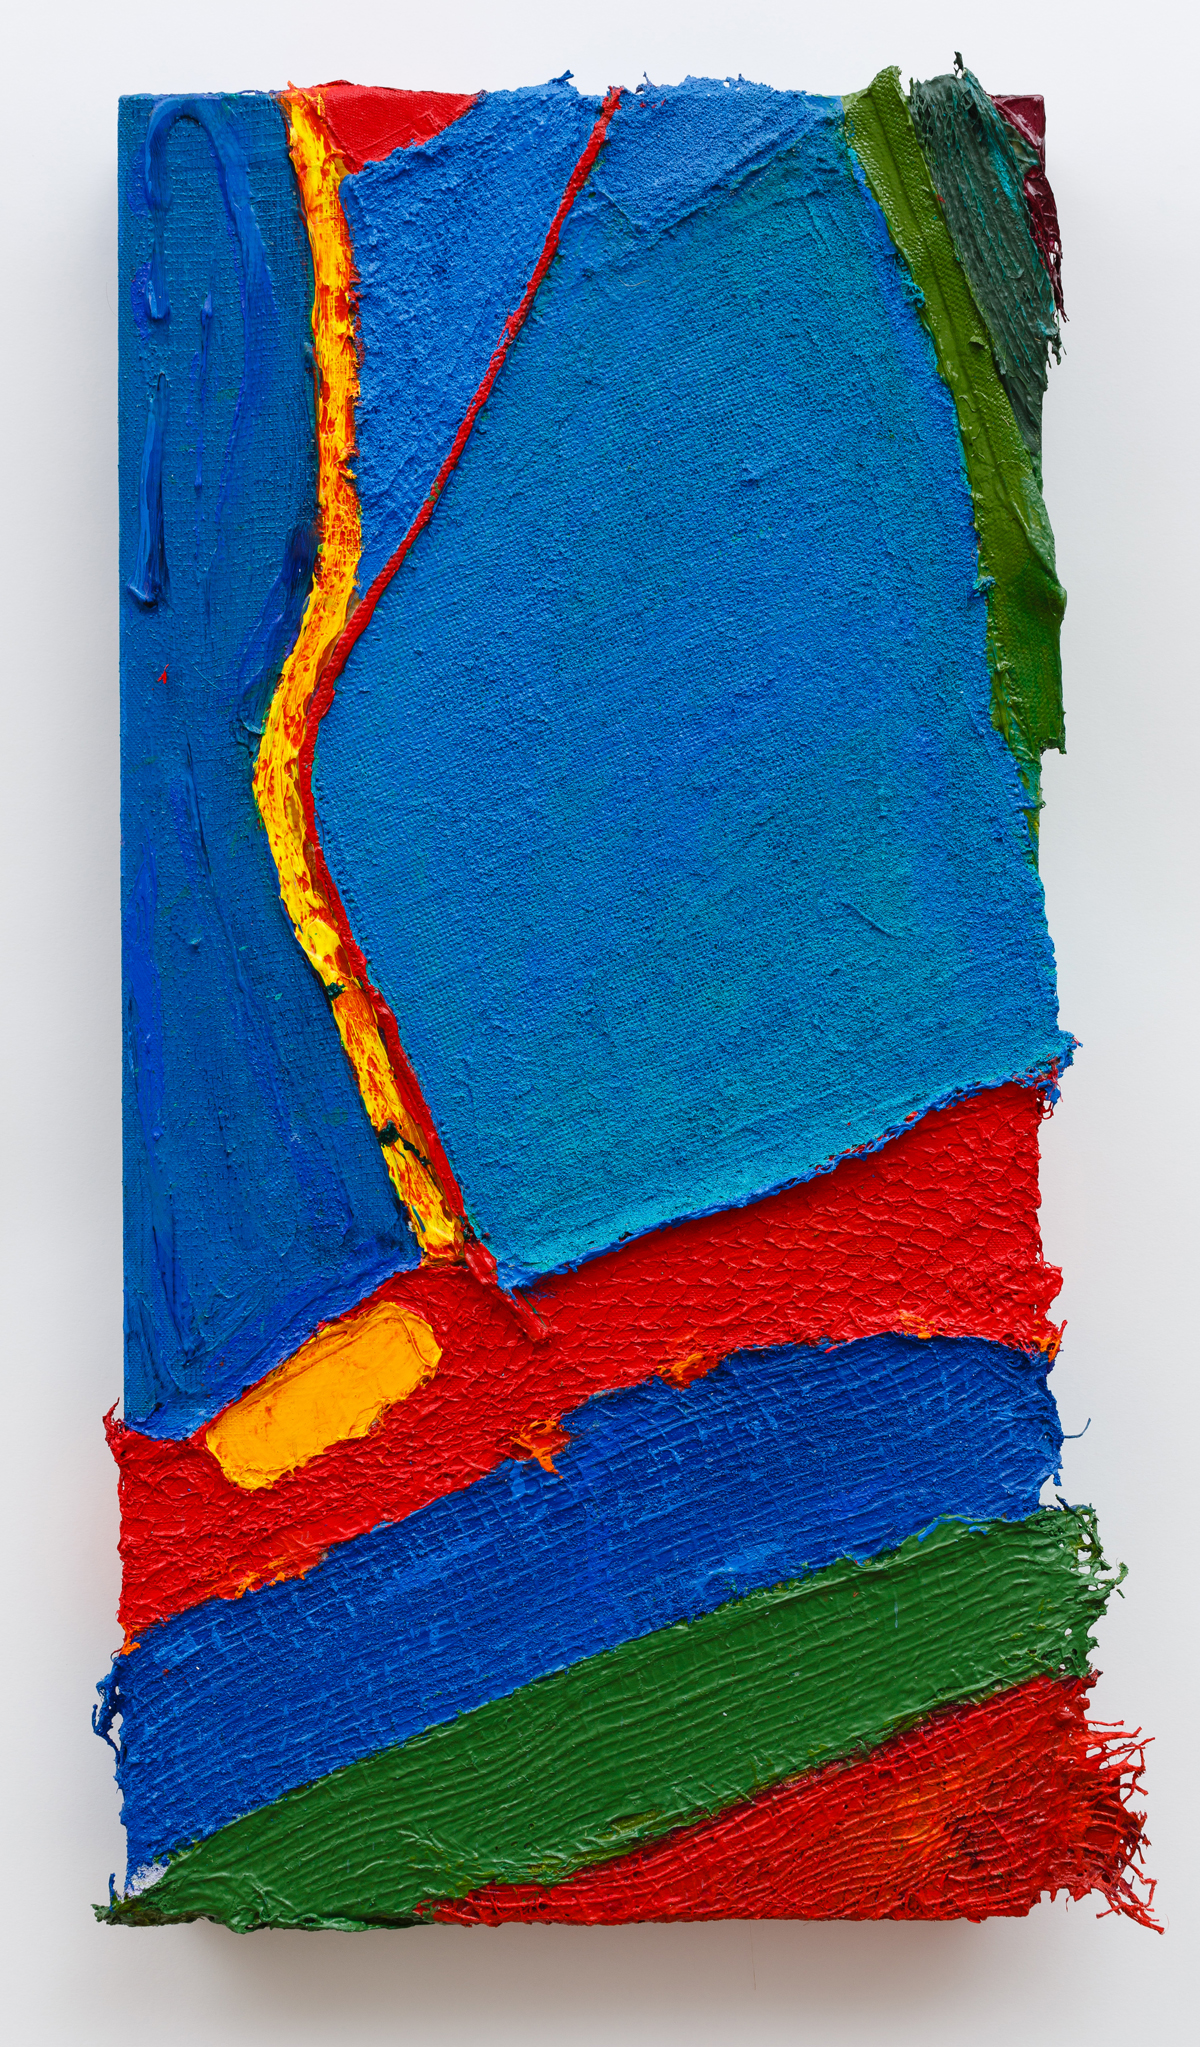 Electricity (2011), Acrylic and Pumice on Bootlace, Fruit Netting, Hessian Scrim, Plastic Netting, Cloth and Canvas, 24 x 12 inches